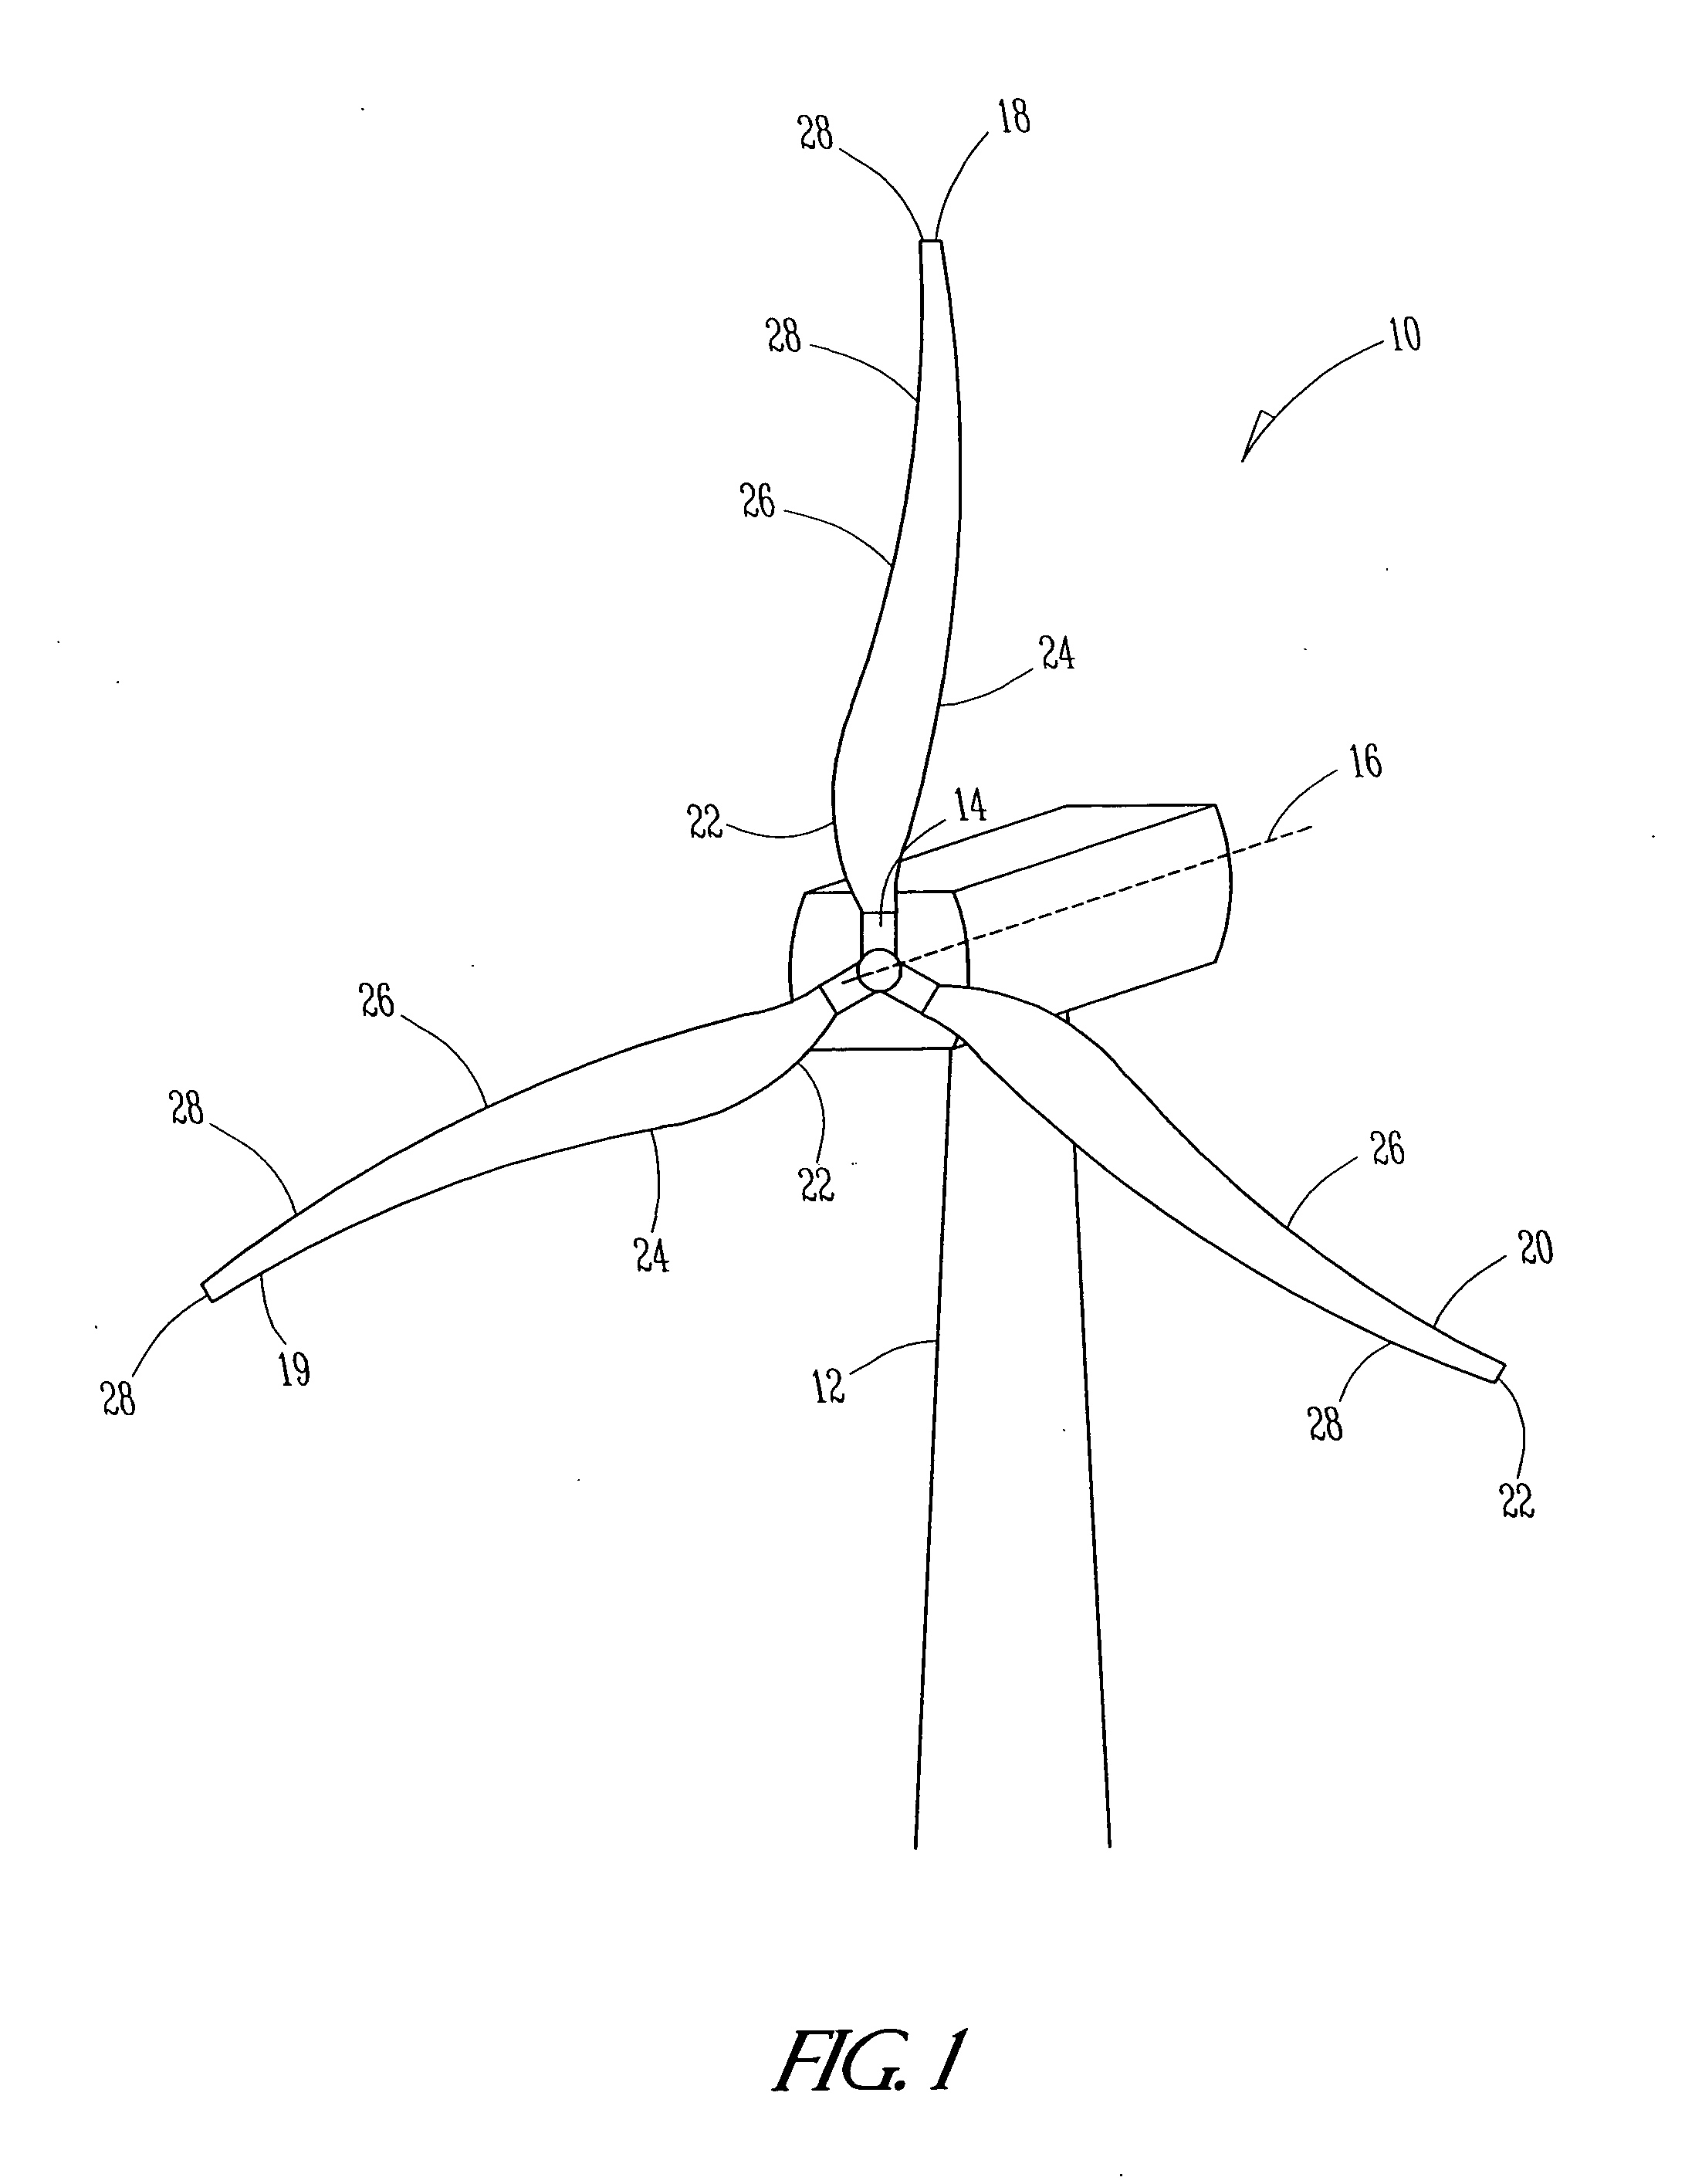 Wind turbine rotor blade and airfoil section